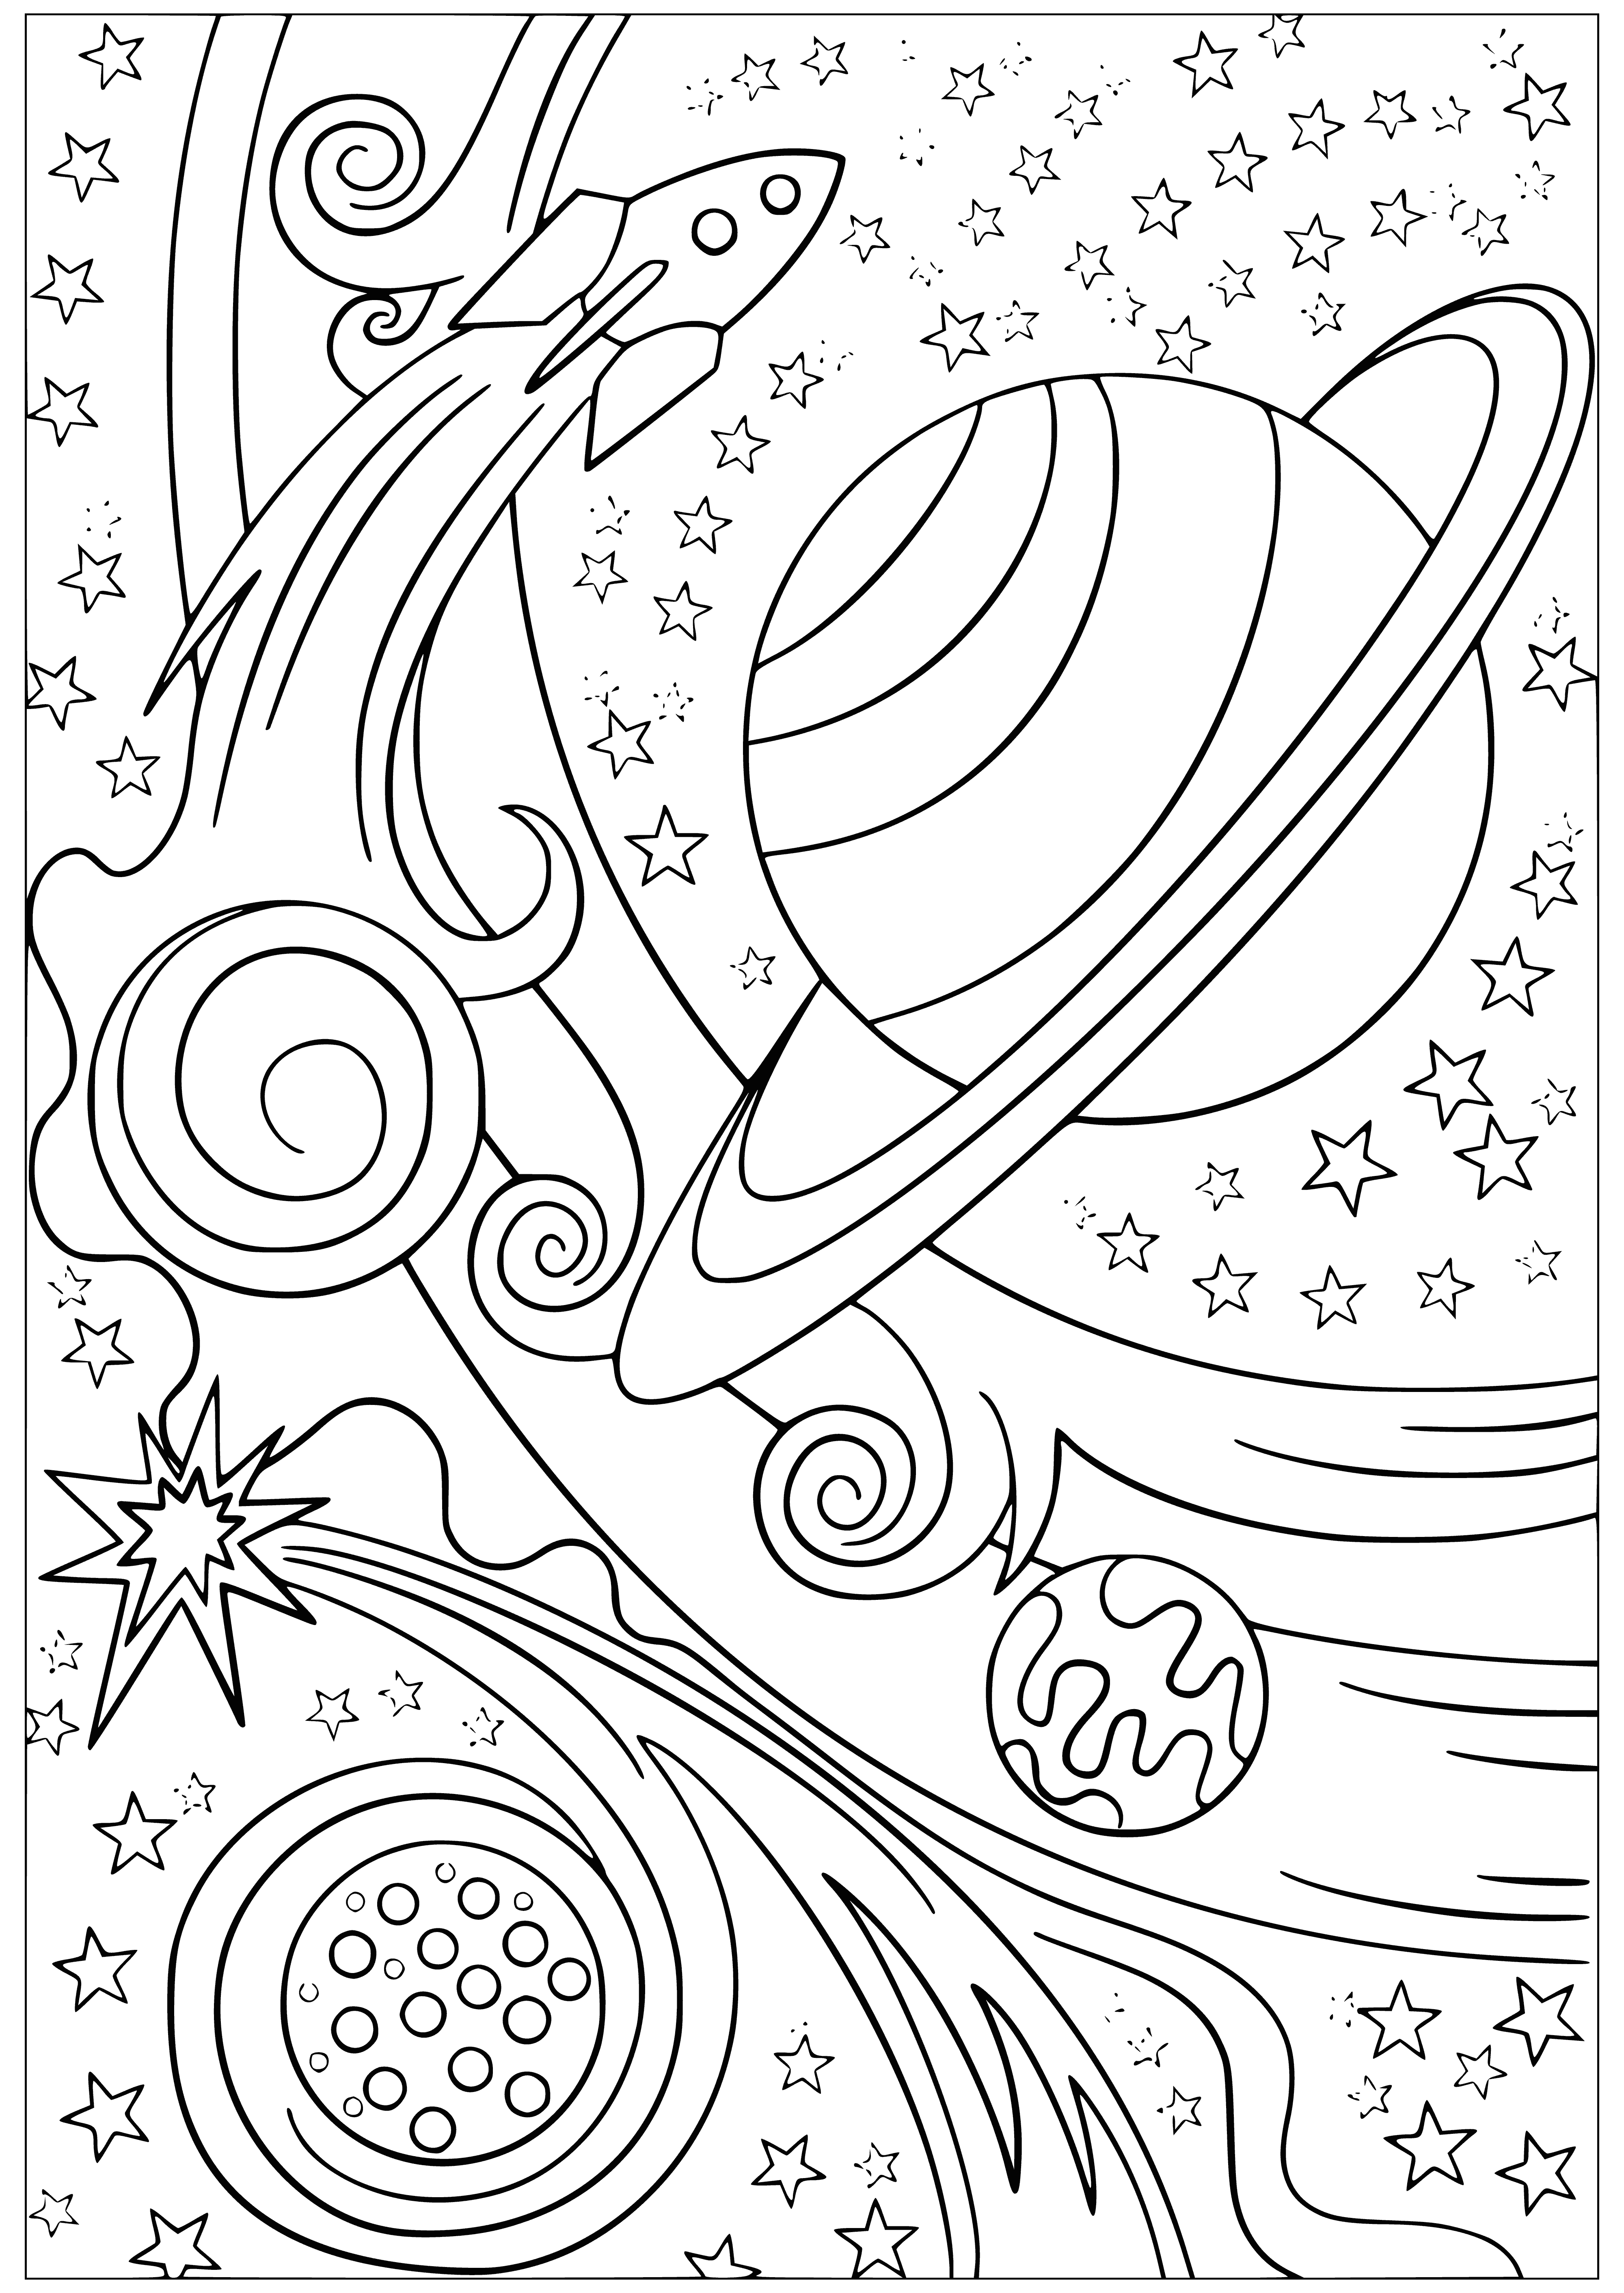 coloring page: Rocket streaks across space, leaving stars in its wake. Silver & white rocket has blue flame from tail, surrounded by a halo of light making it look like it is on fire.